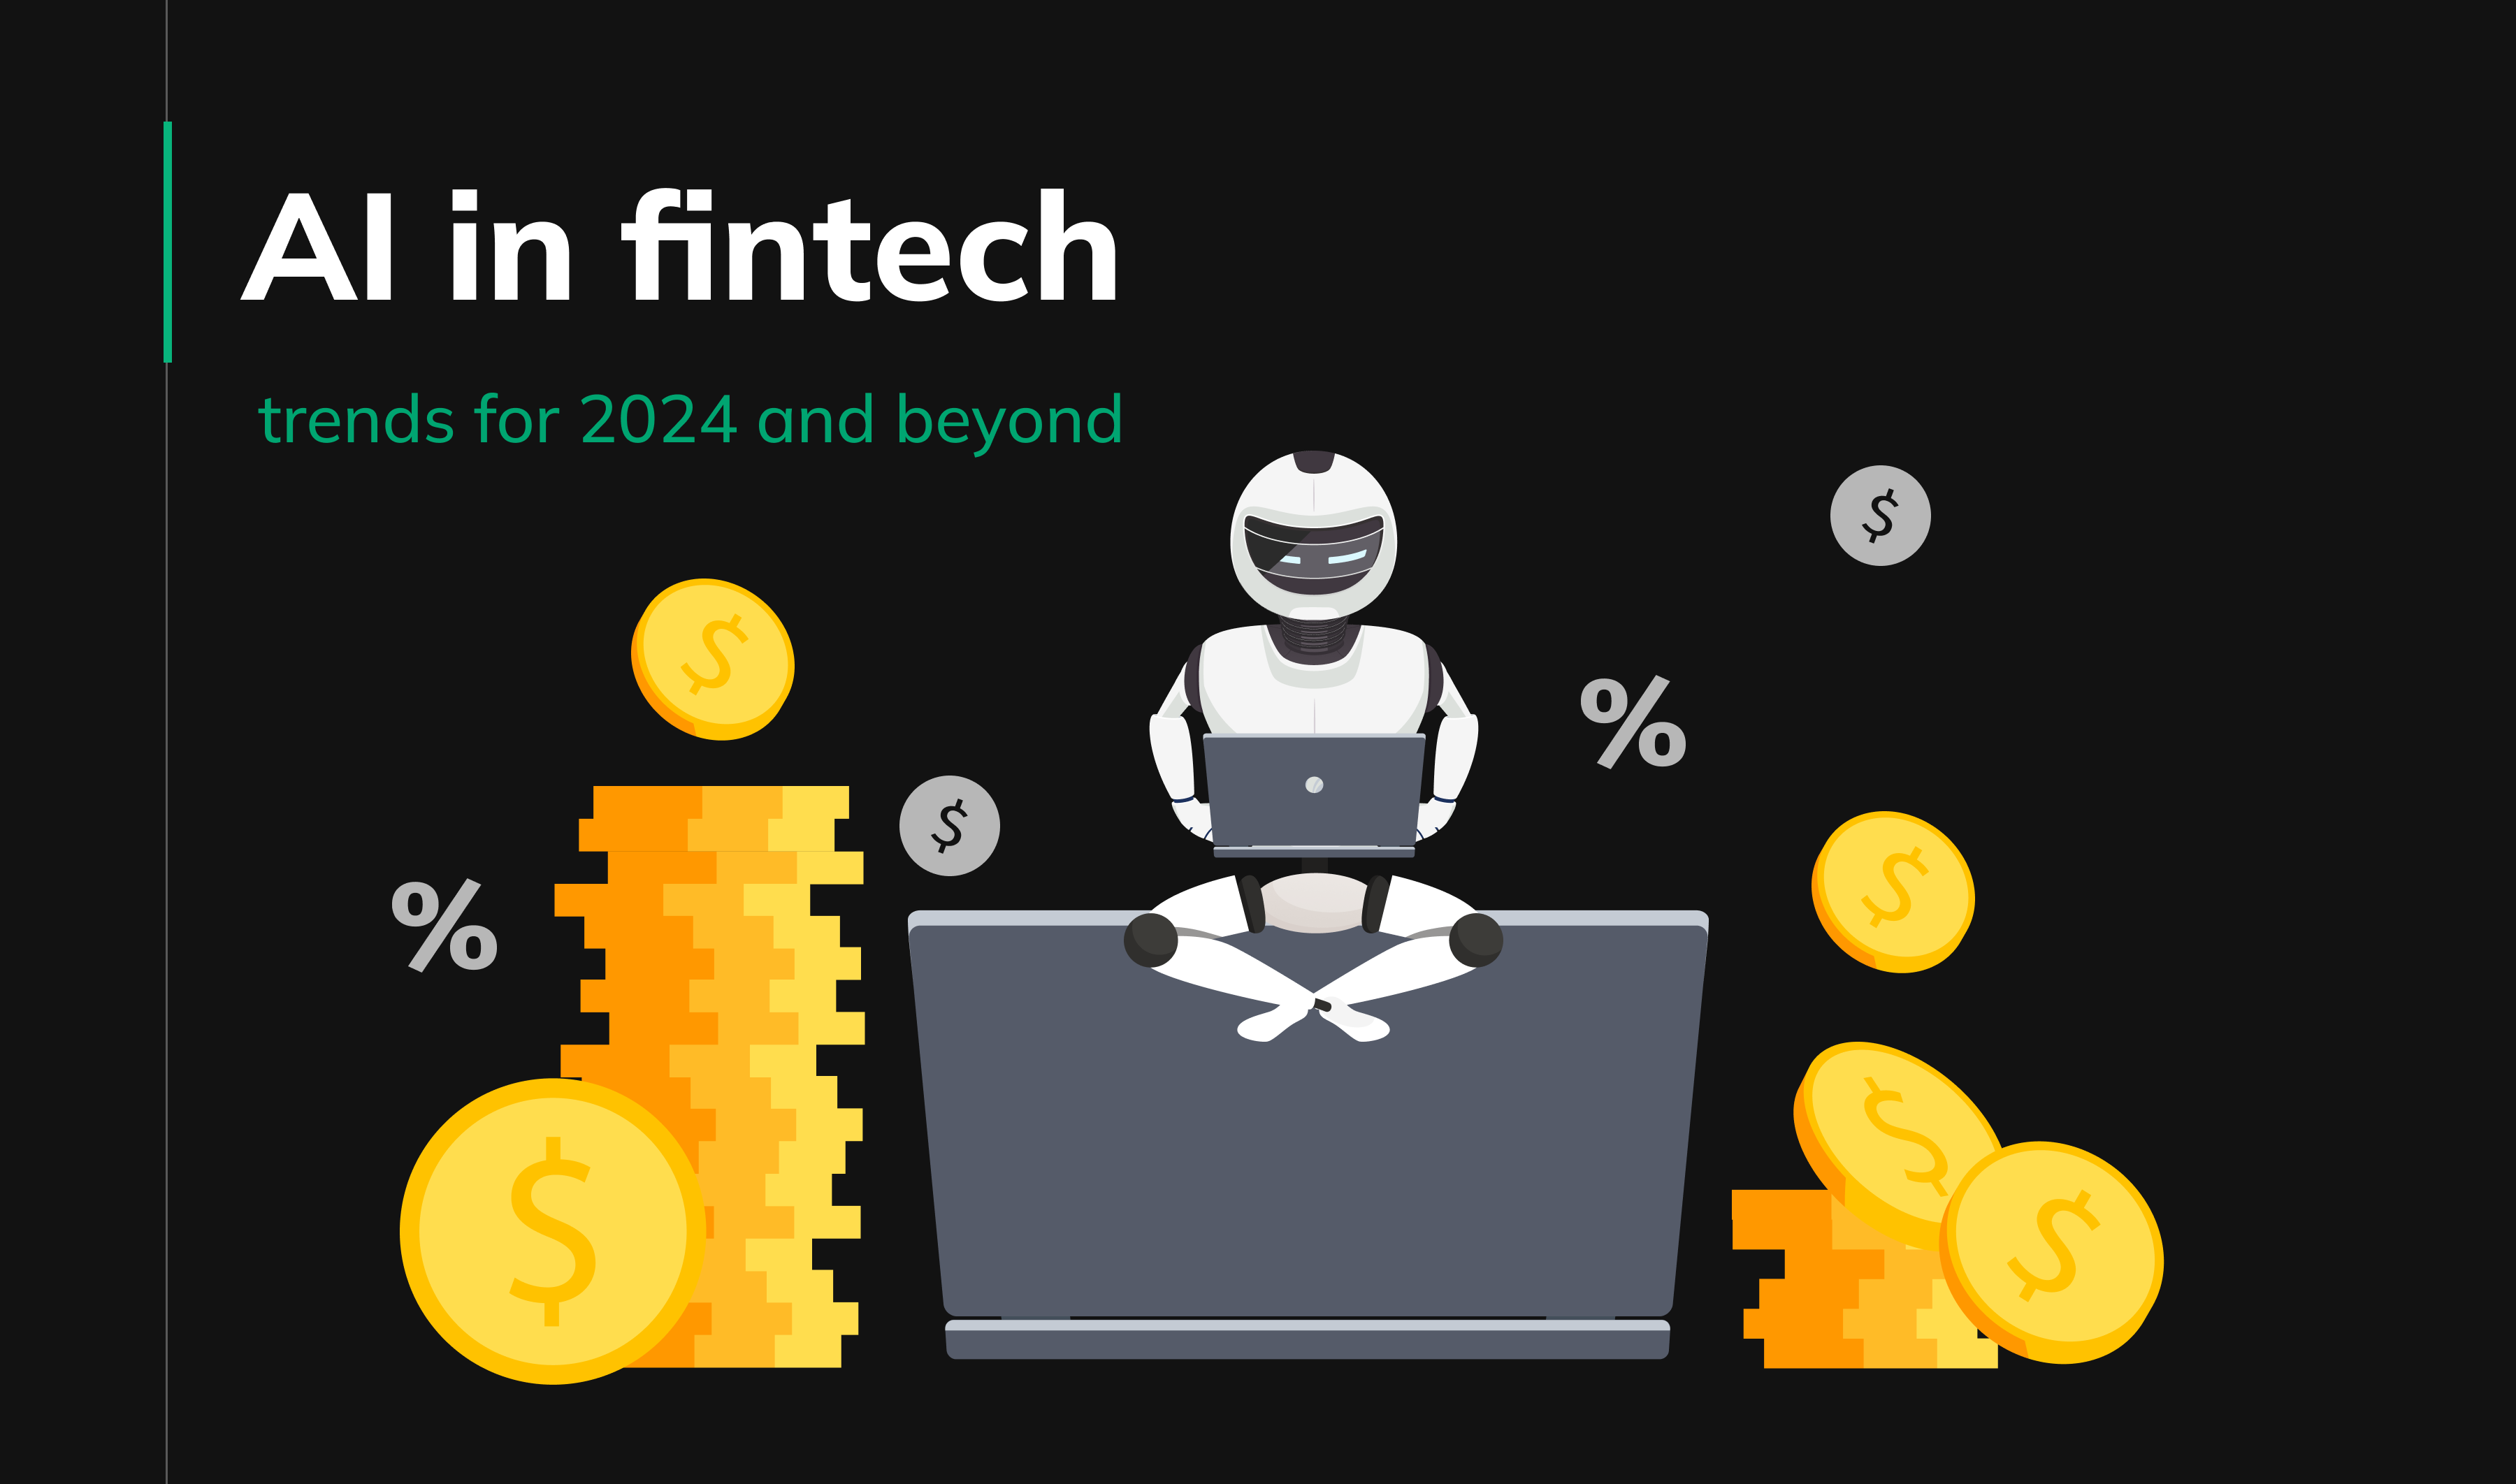 AI in Fintech trends for 2024 and beyond